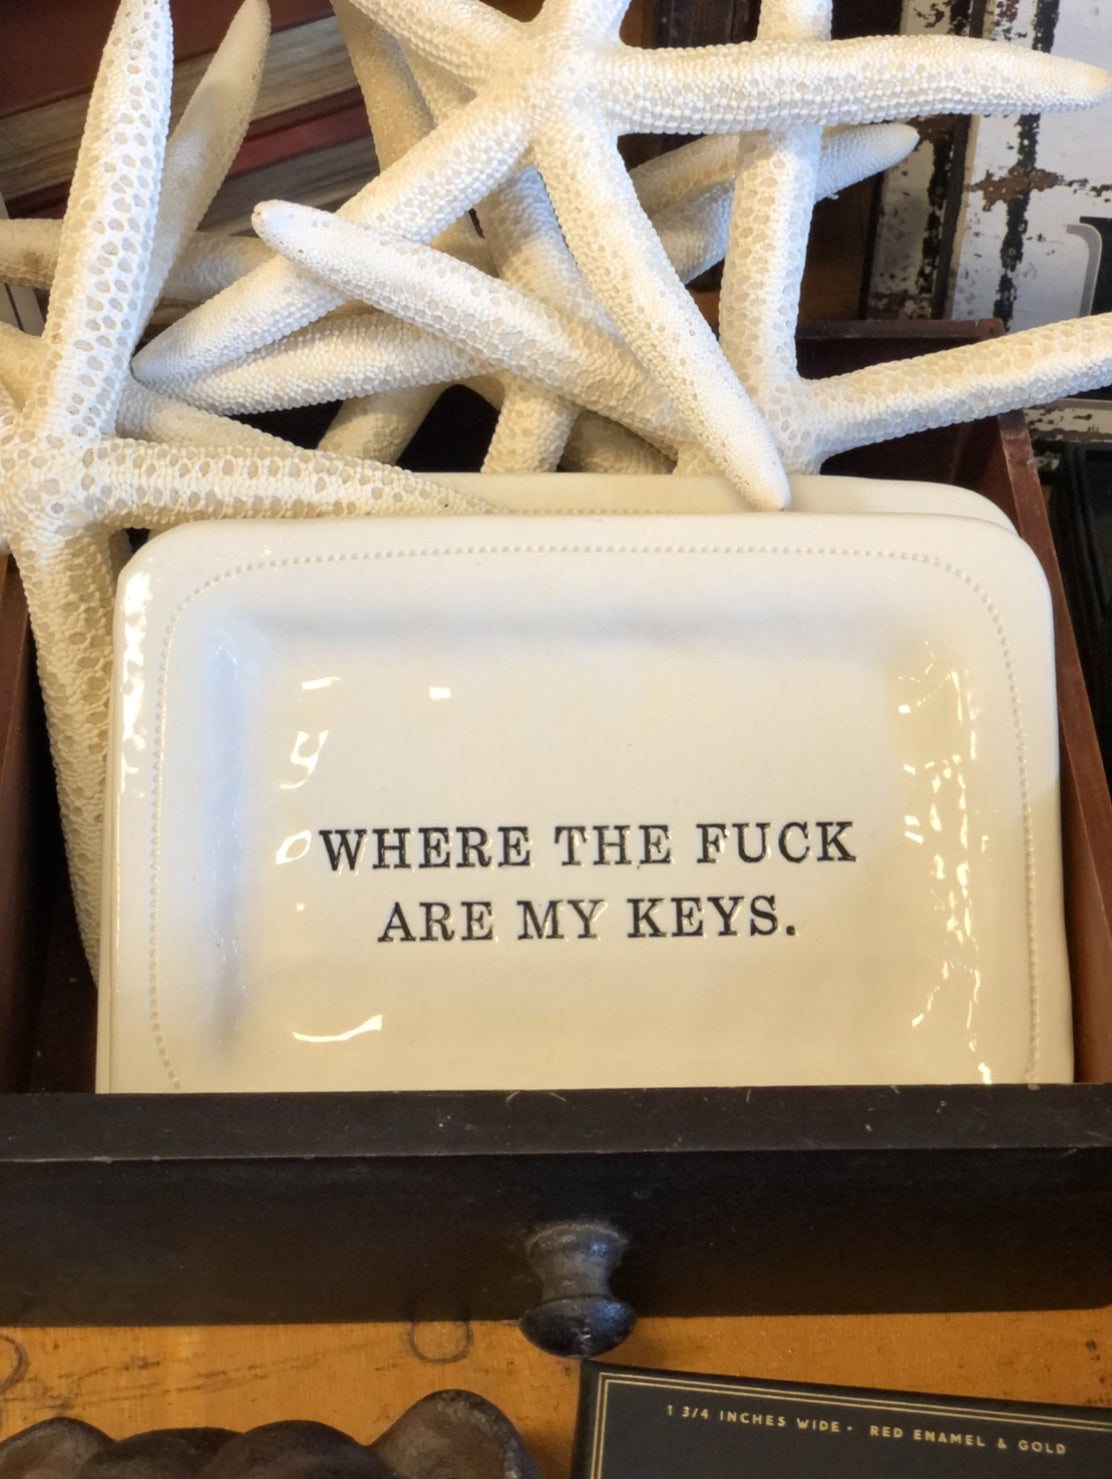 Where the Fuck are my Keys - 4 x 6 porcelain dish